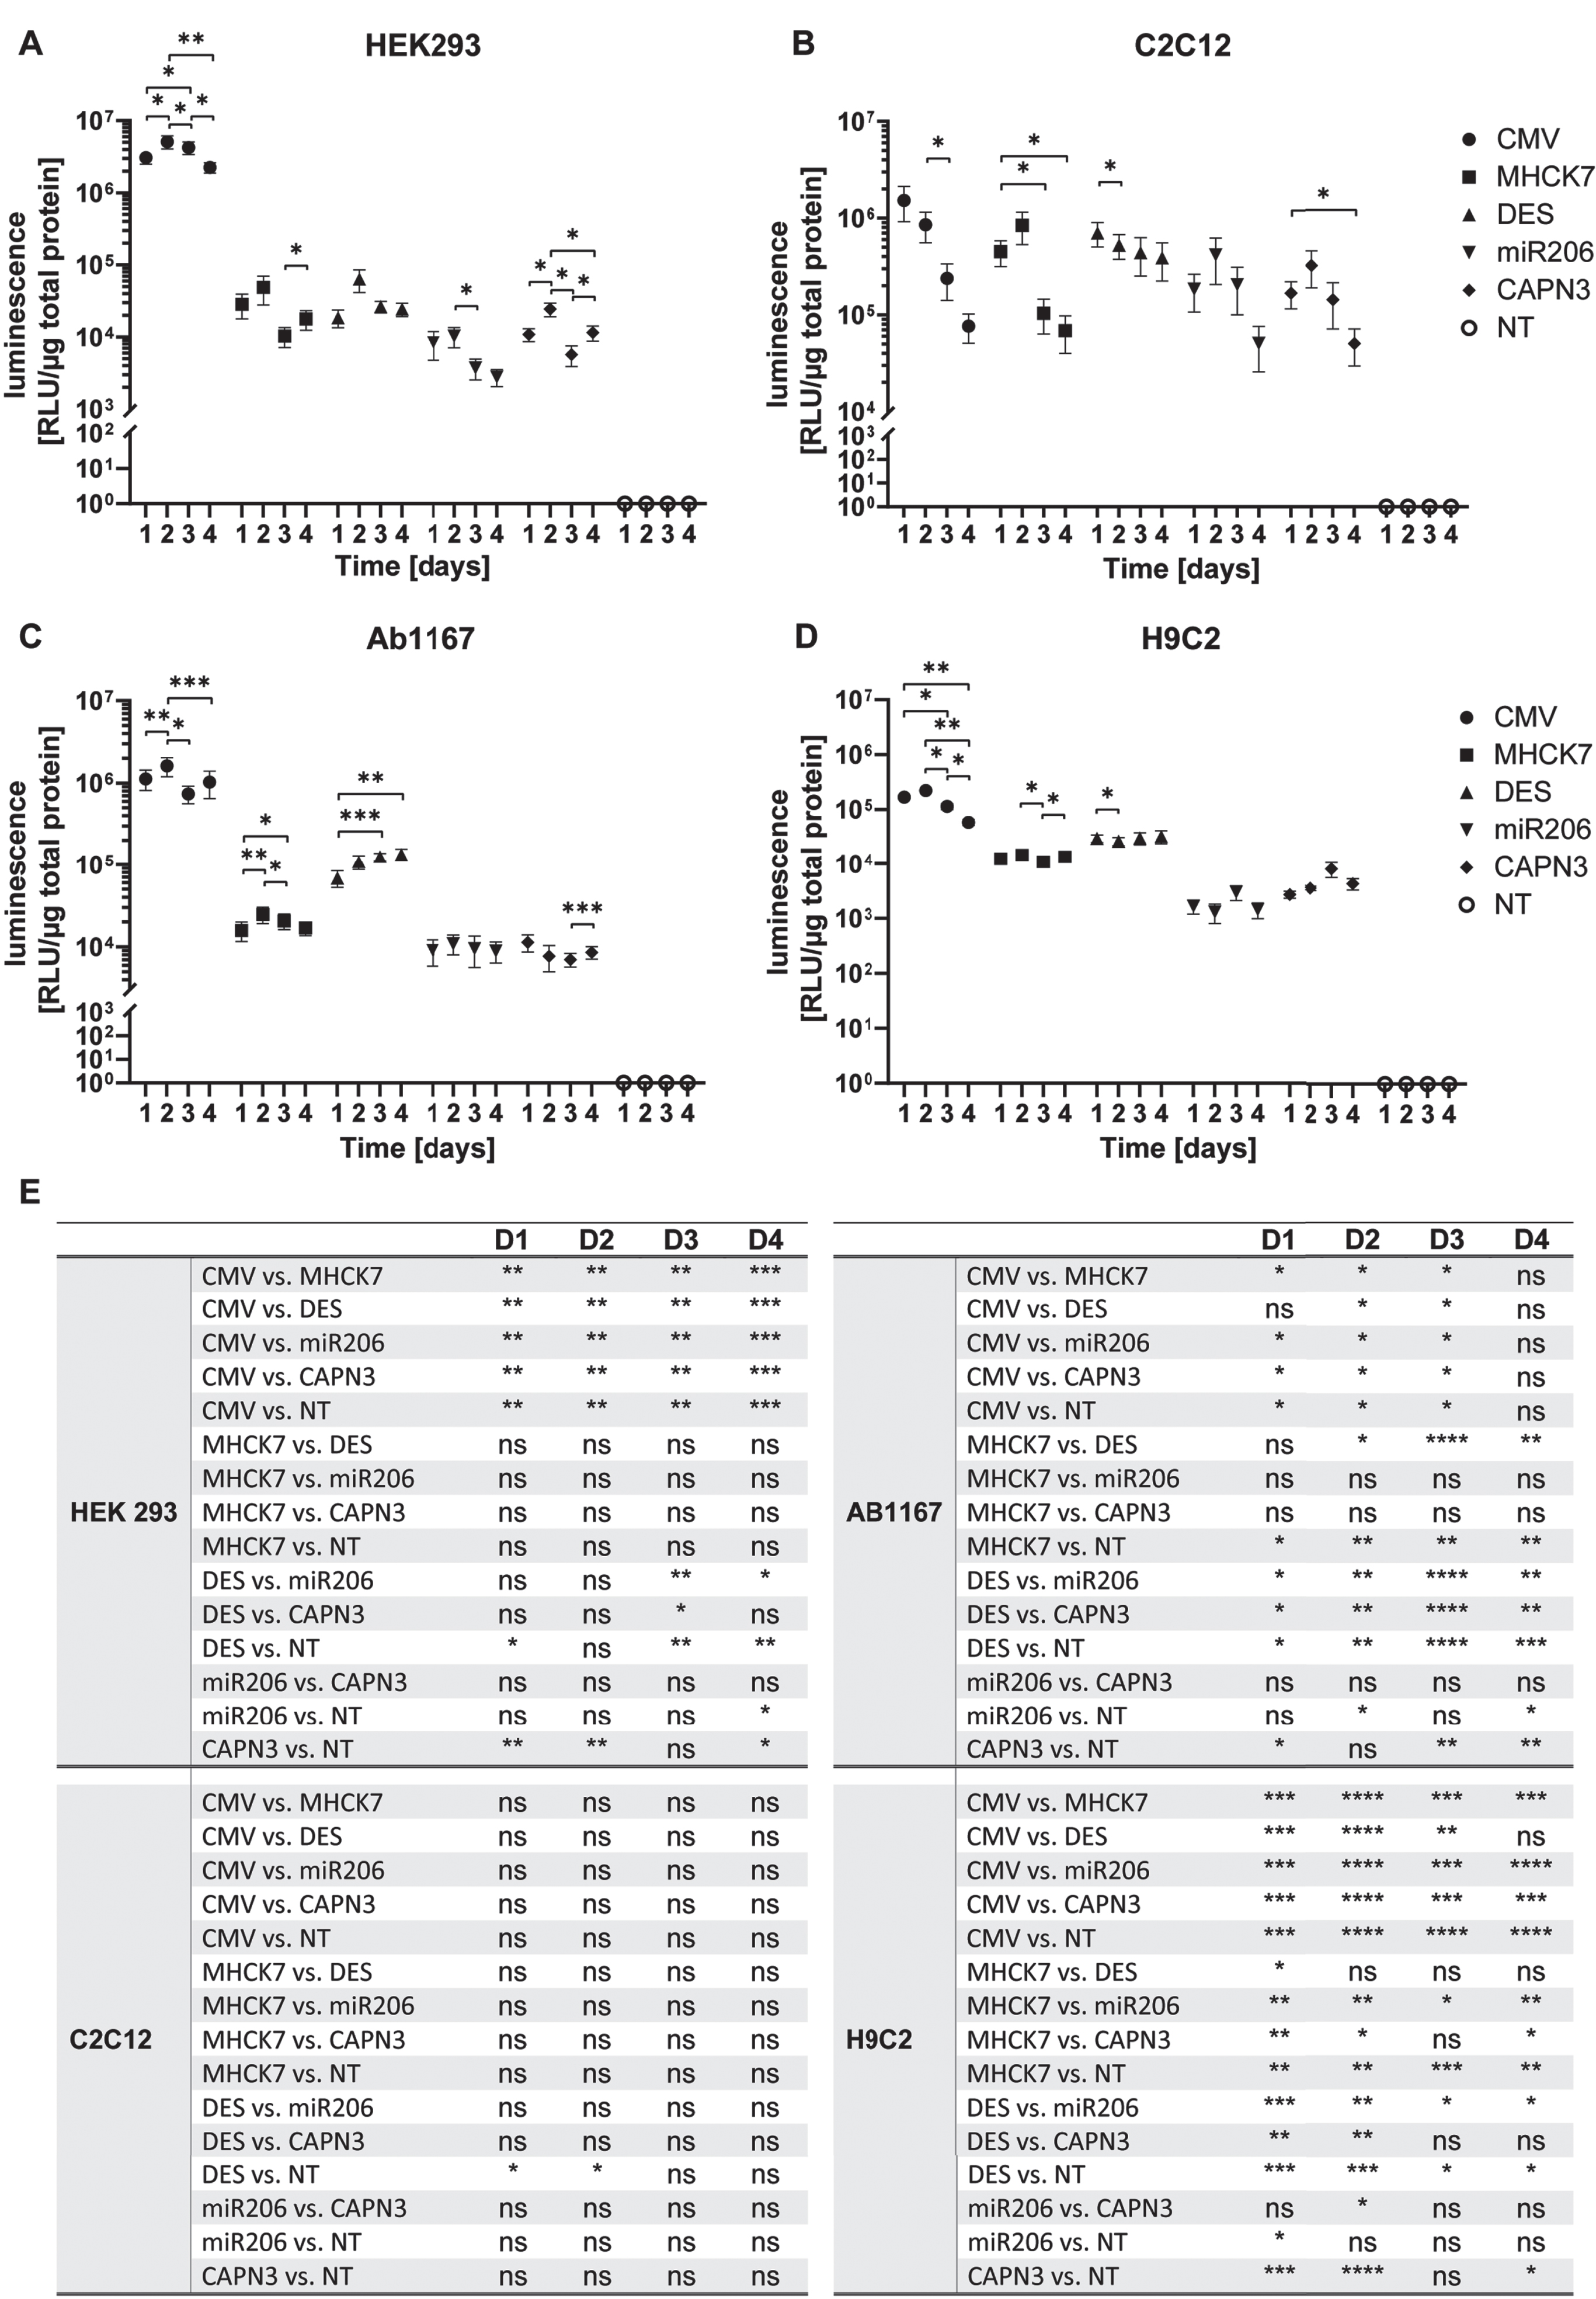 Promotor activity and specificity measured by luciferase assay in different proliferating cell types. (A–D) Proliferating HEK293 (A), C2C12 (B), HSKM-Ab1167 (C) and H9C2 (D) were transfected with the constructs encoding luciferase under control of respective promotors. Luciferase activity was measured on day 1, 2, 3 and 4 post transfection. All samples were normalized to 1μg total protein and datapoints represent mean values±SEMs using a log10 scale (n = 4). Asterisks represent significant differences over 1–4 days within each promotor group (*p < 0.05; **p < 0.01; ***p < 0,001). (E) Overview of all significant differences (*p < 0.05; **p < 0.01; ***p < 0,001; ****p < 0,0001; ns = not significant) derived by the promotor driven luciferase activity at day 1, 2, 3 and 4, respectively.